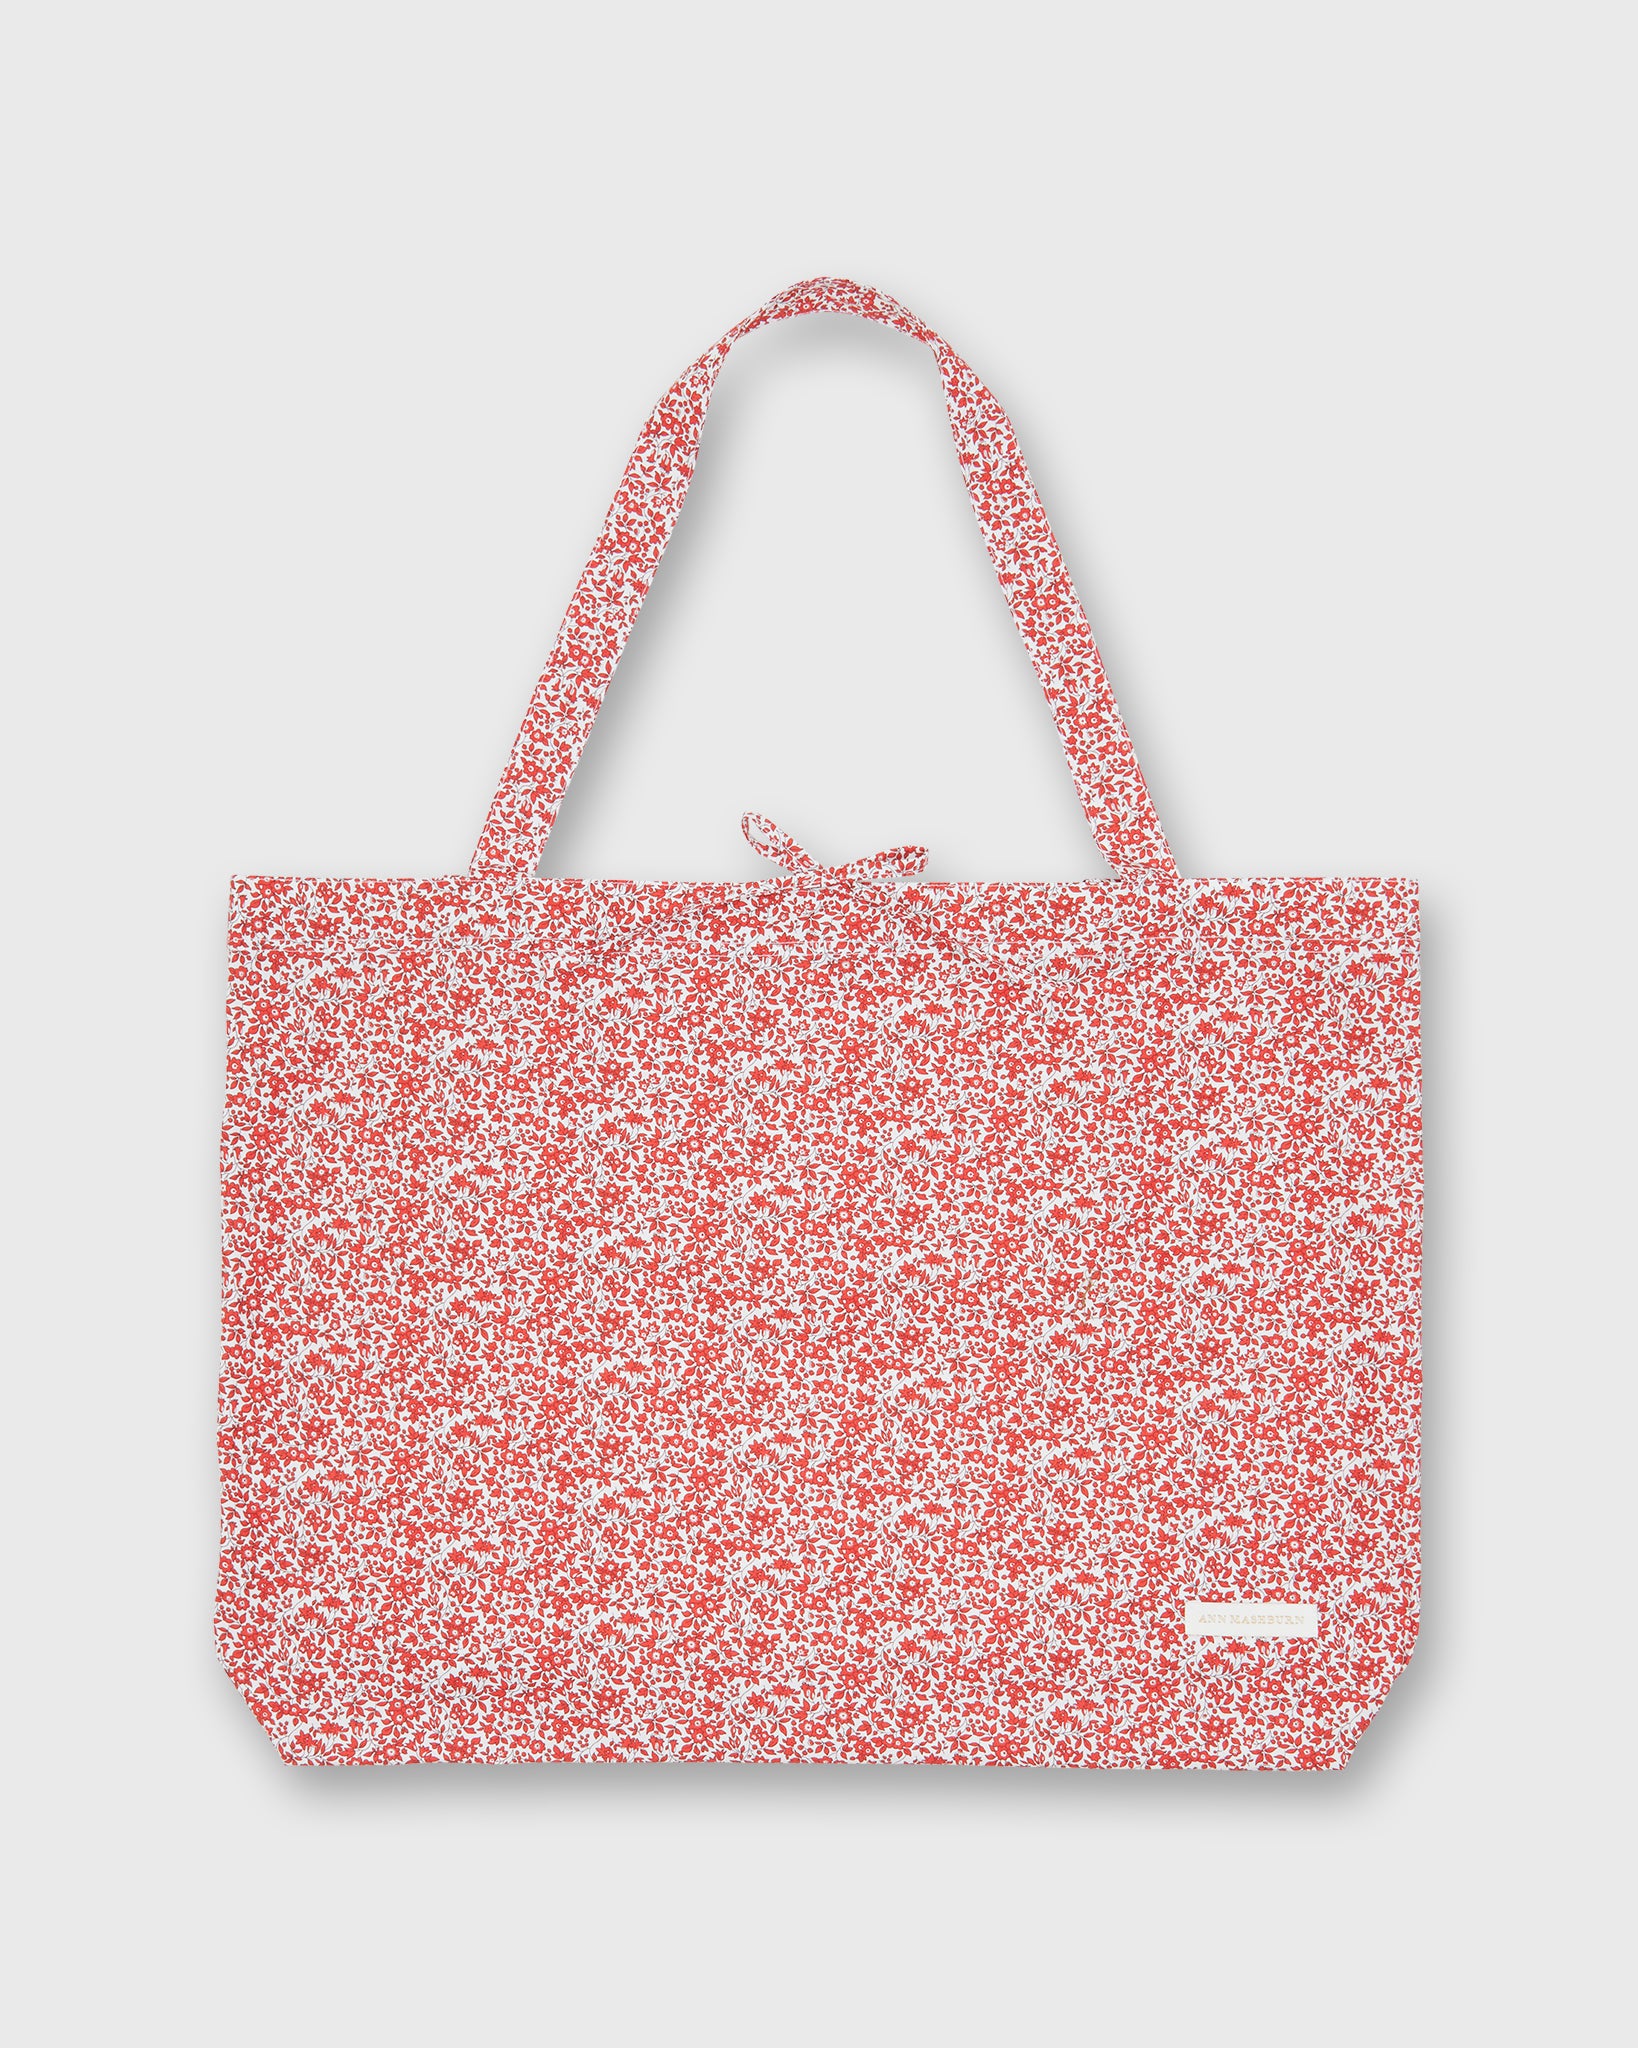 Reusable Tote Bag in Red/Multi Chamomile Liberty Fabric